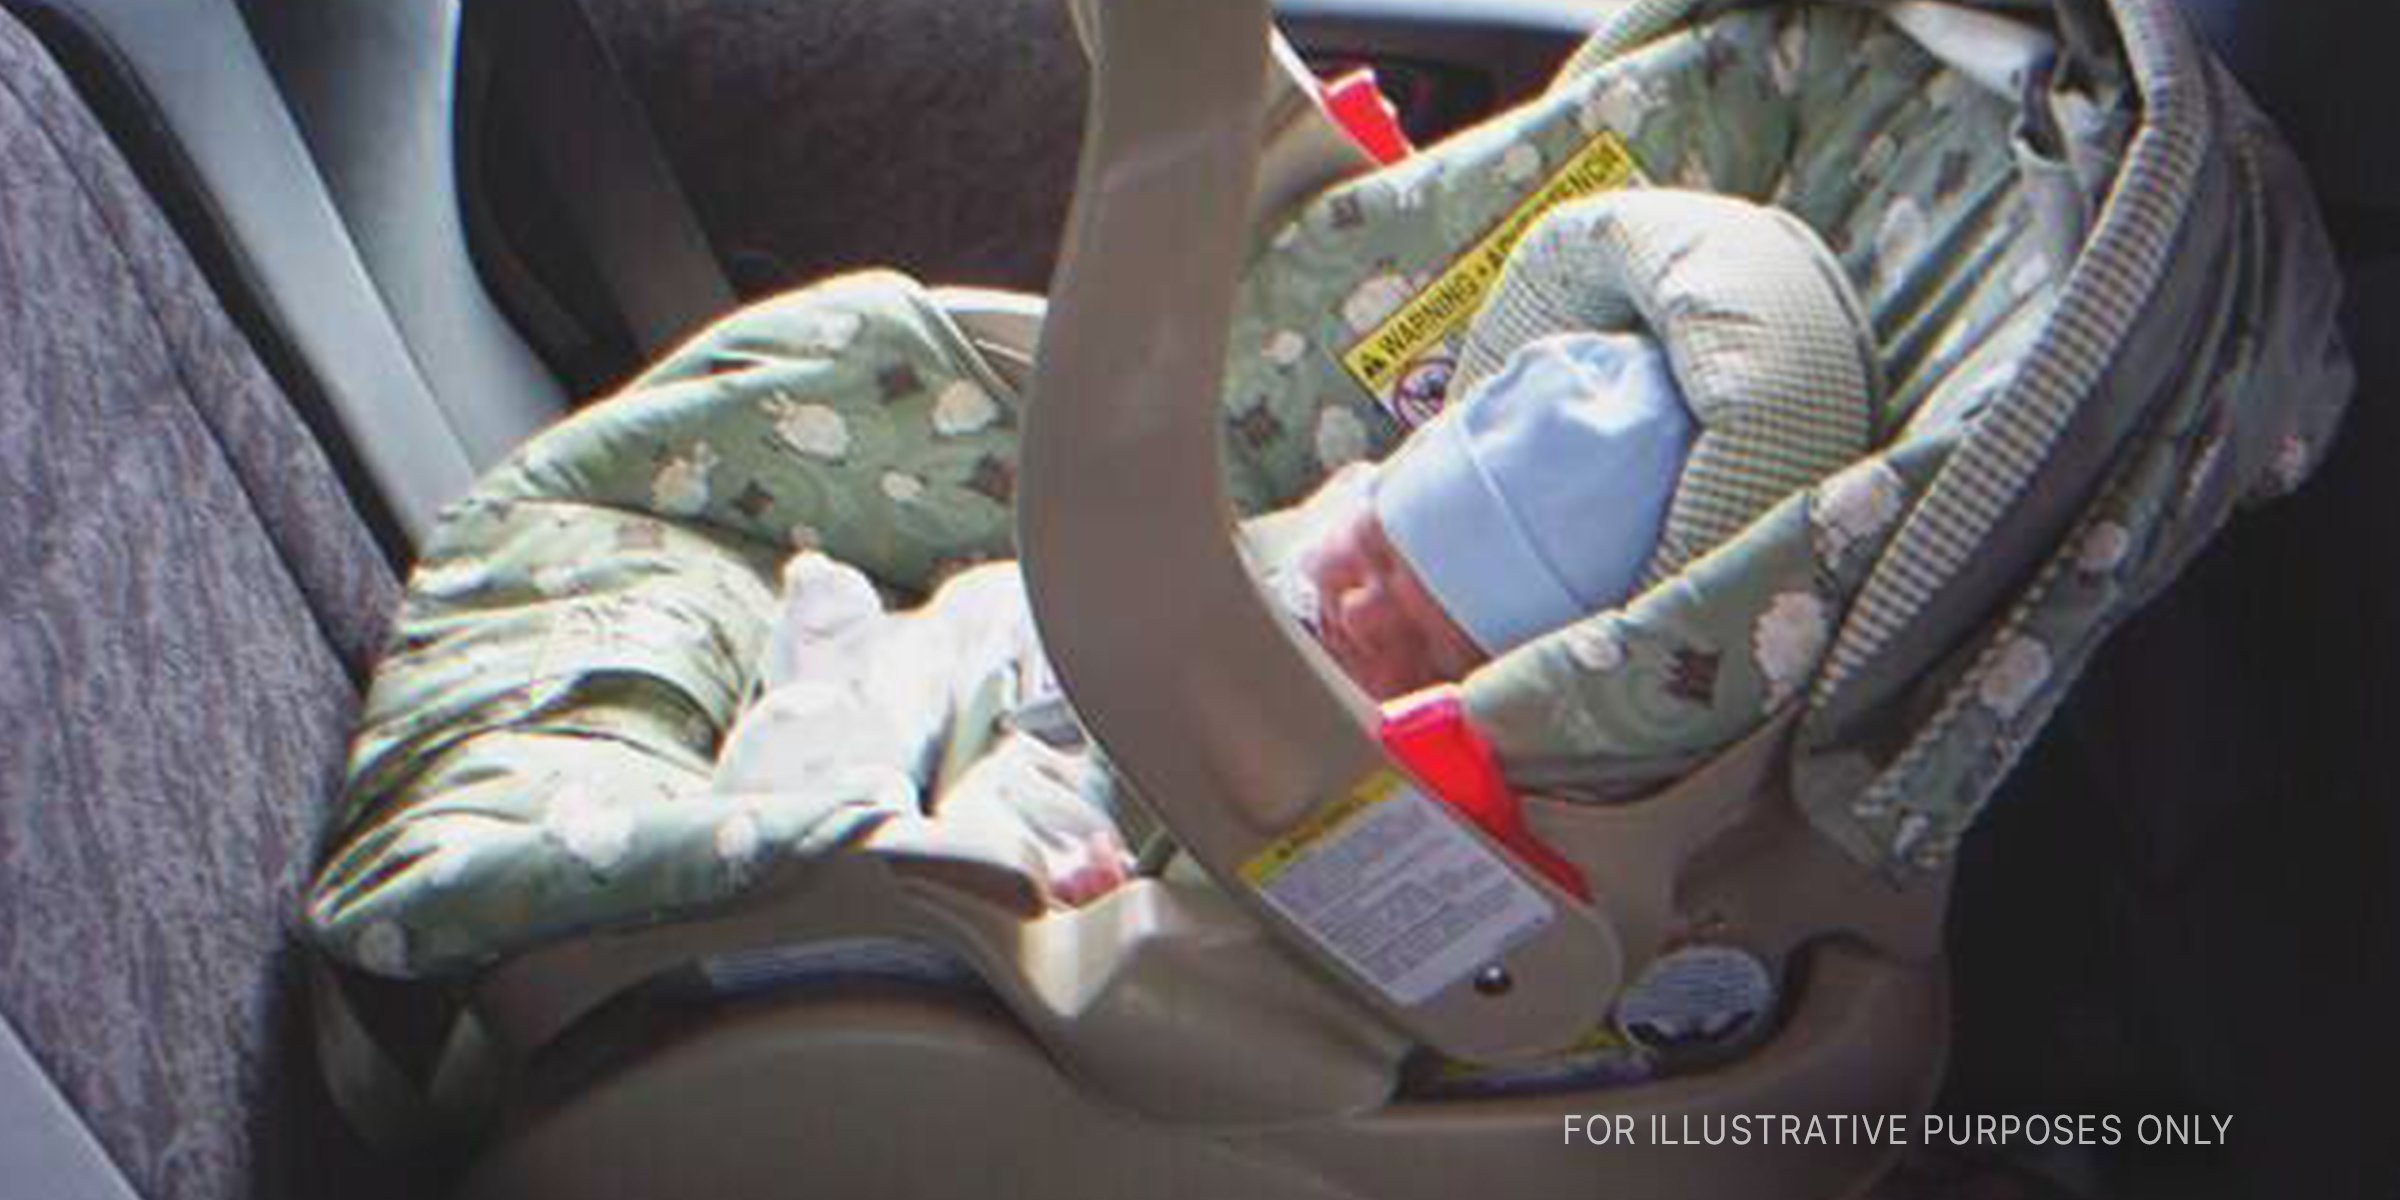 Newborn baby in a carseat | Source: Flickr / Chris and Kris (CC BY-SA 2.0)